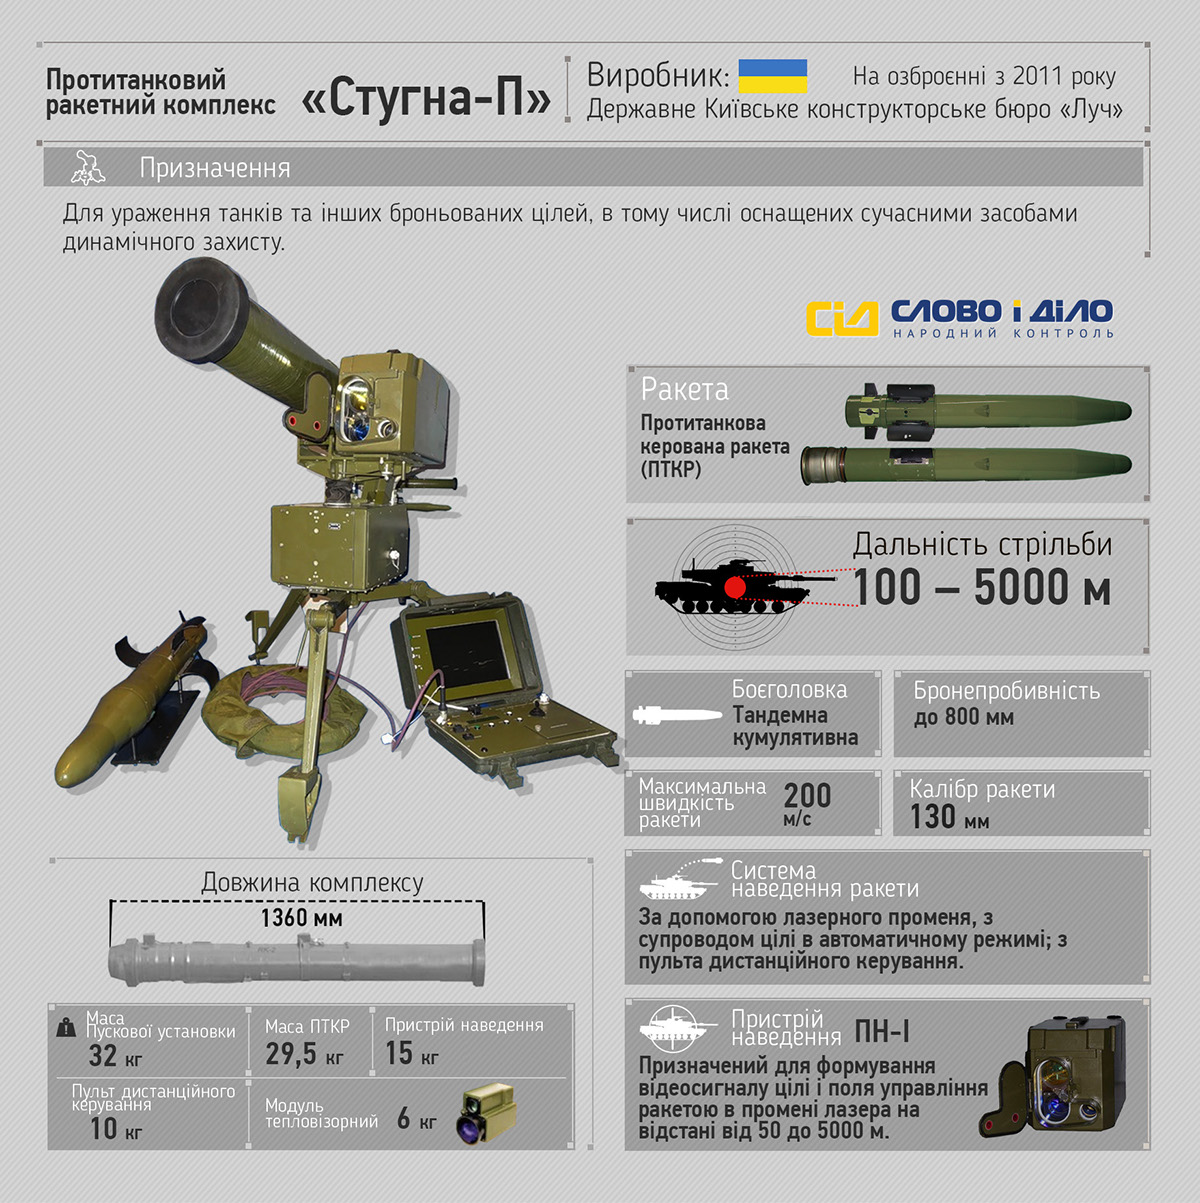 ukraine Russia united states War conflict Gun Weapon Armor Armour army Military infographic donbass